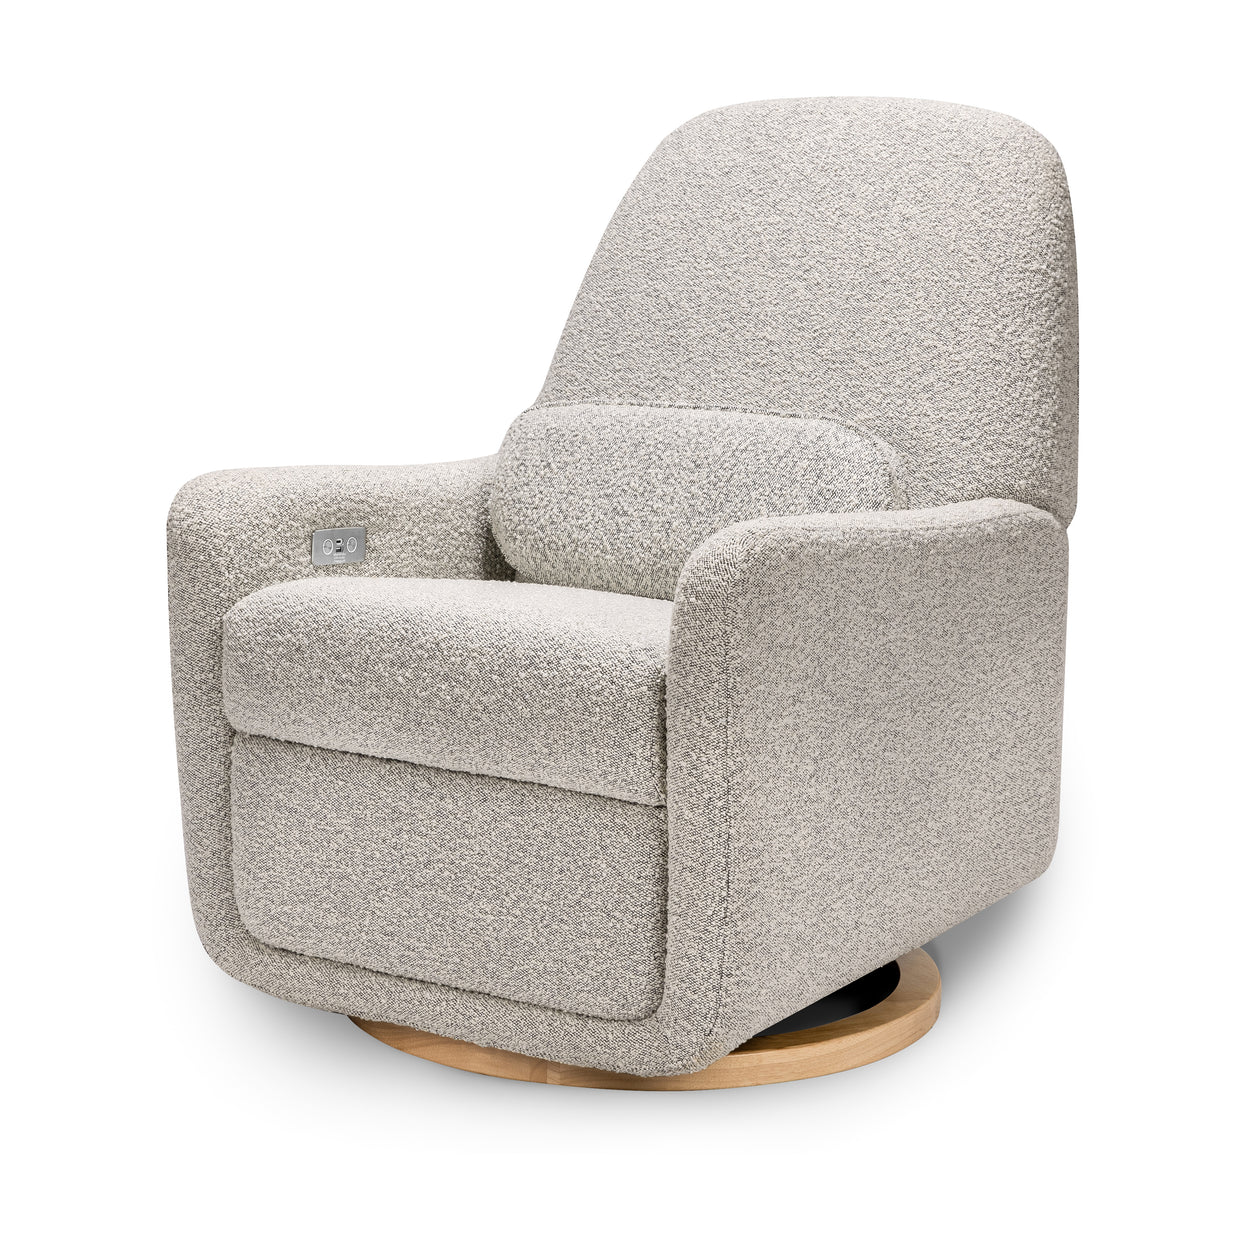 ARC Electronic Recliner & Swivel Glider in Black White Boucle with USB Port